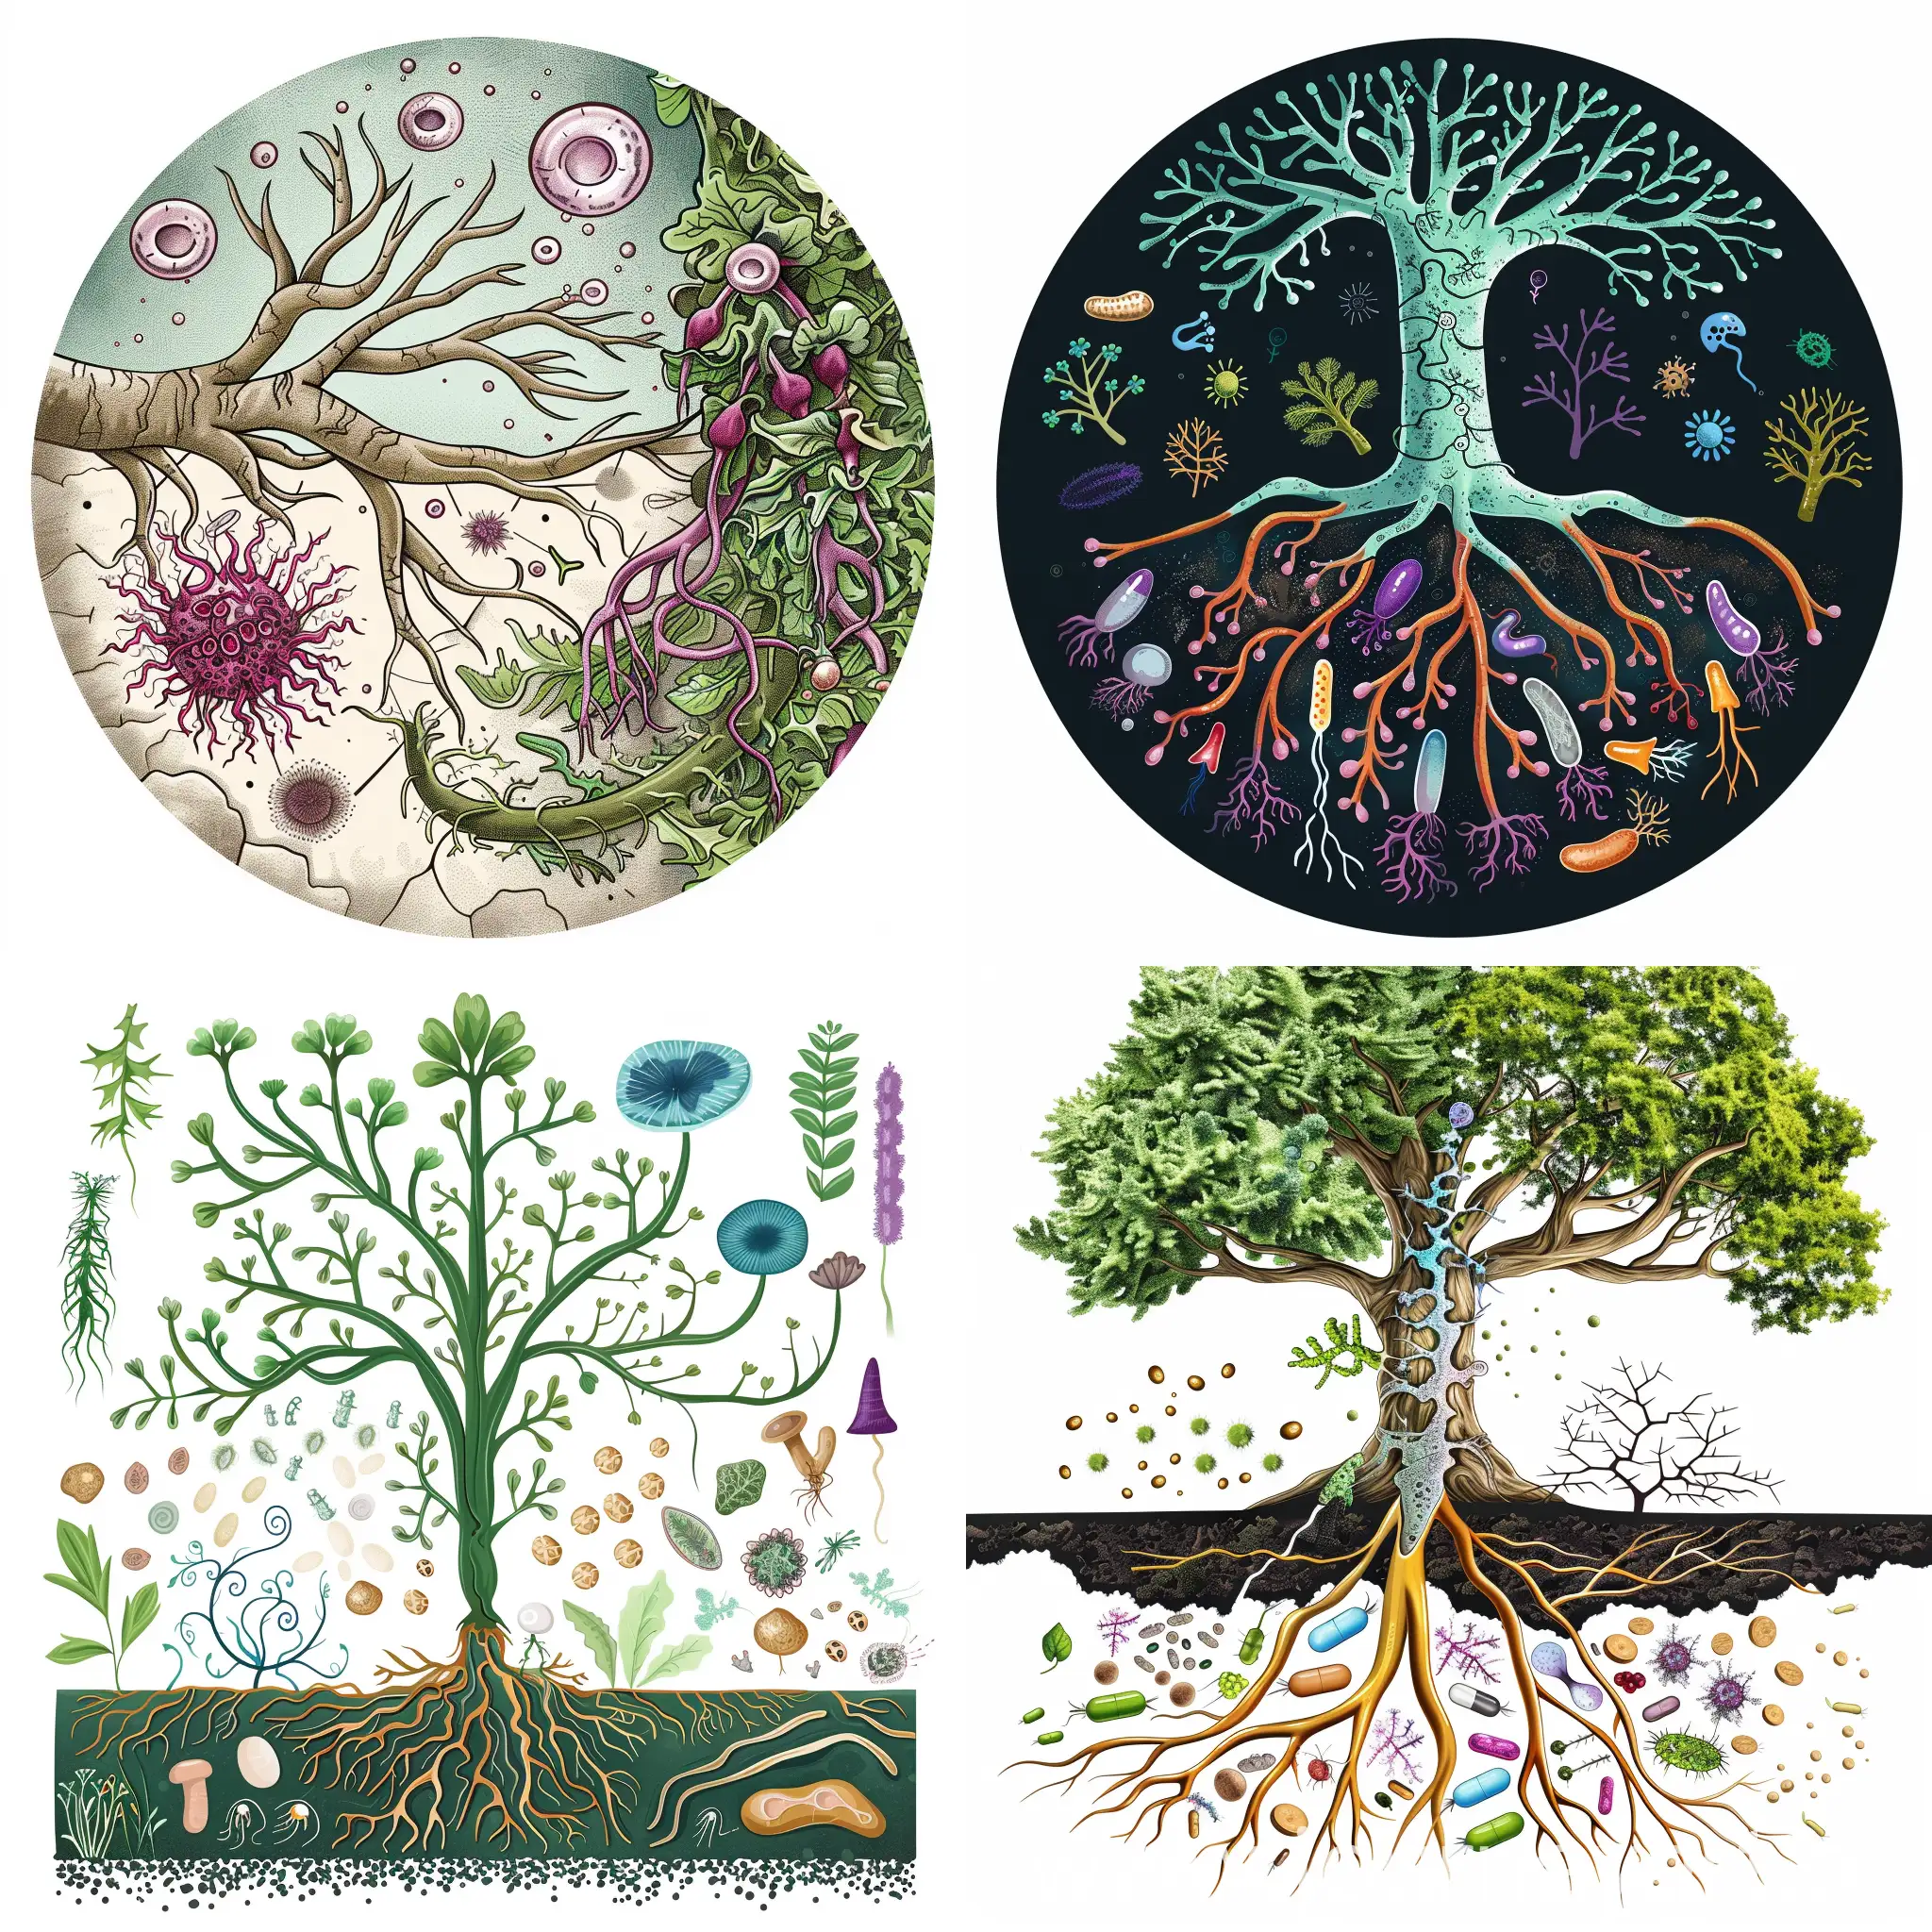 Scientific-Illustration-of-Microorganisms-Interacting-with-Plant-Roots